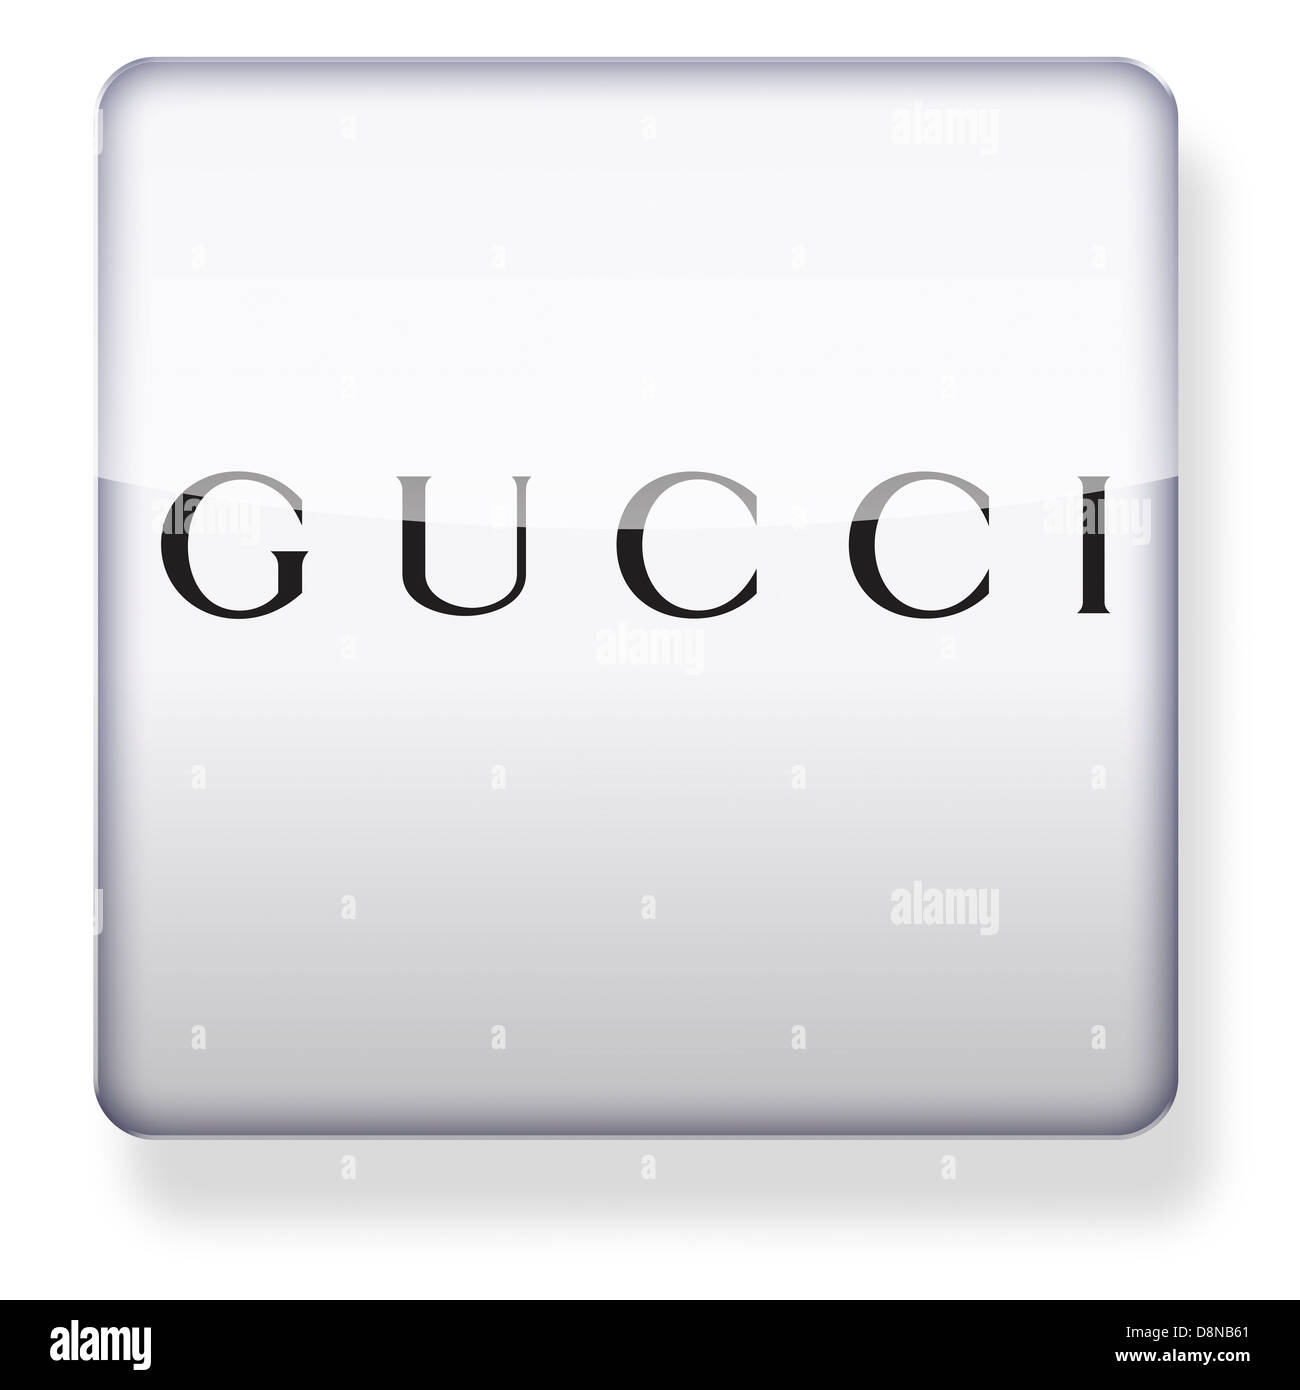 Gucci logo as an app icon. Clipping path included Stock Photo - Alamy